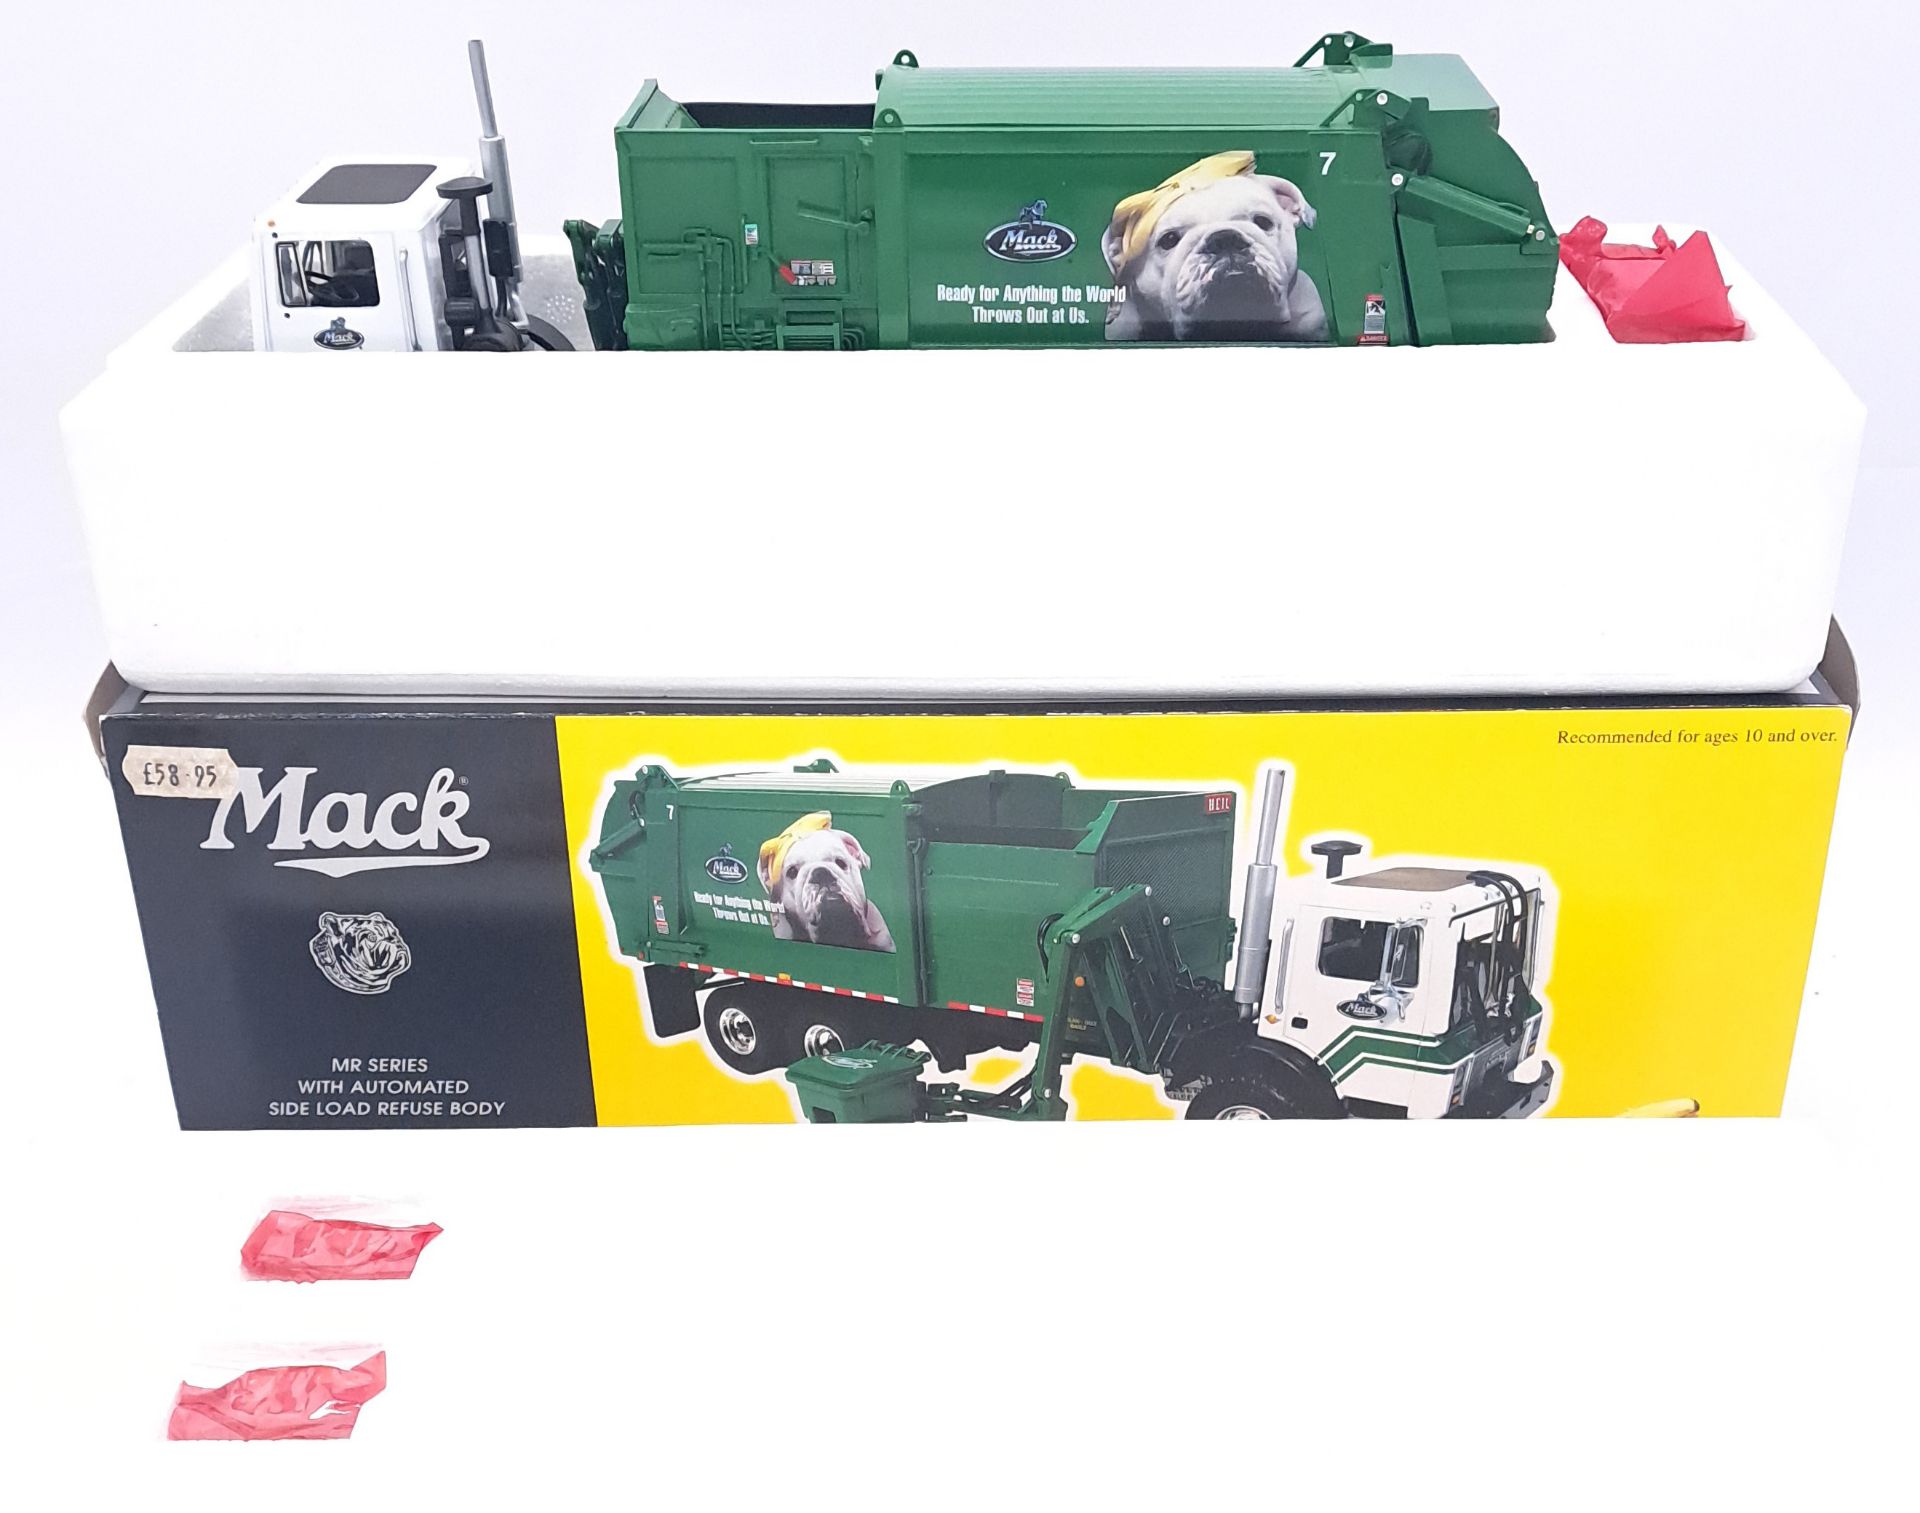 First Gear, a boxed 1:34 scale Mack Truck - Mr Series With Automated Side Load Refuse Body